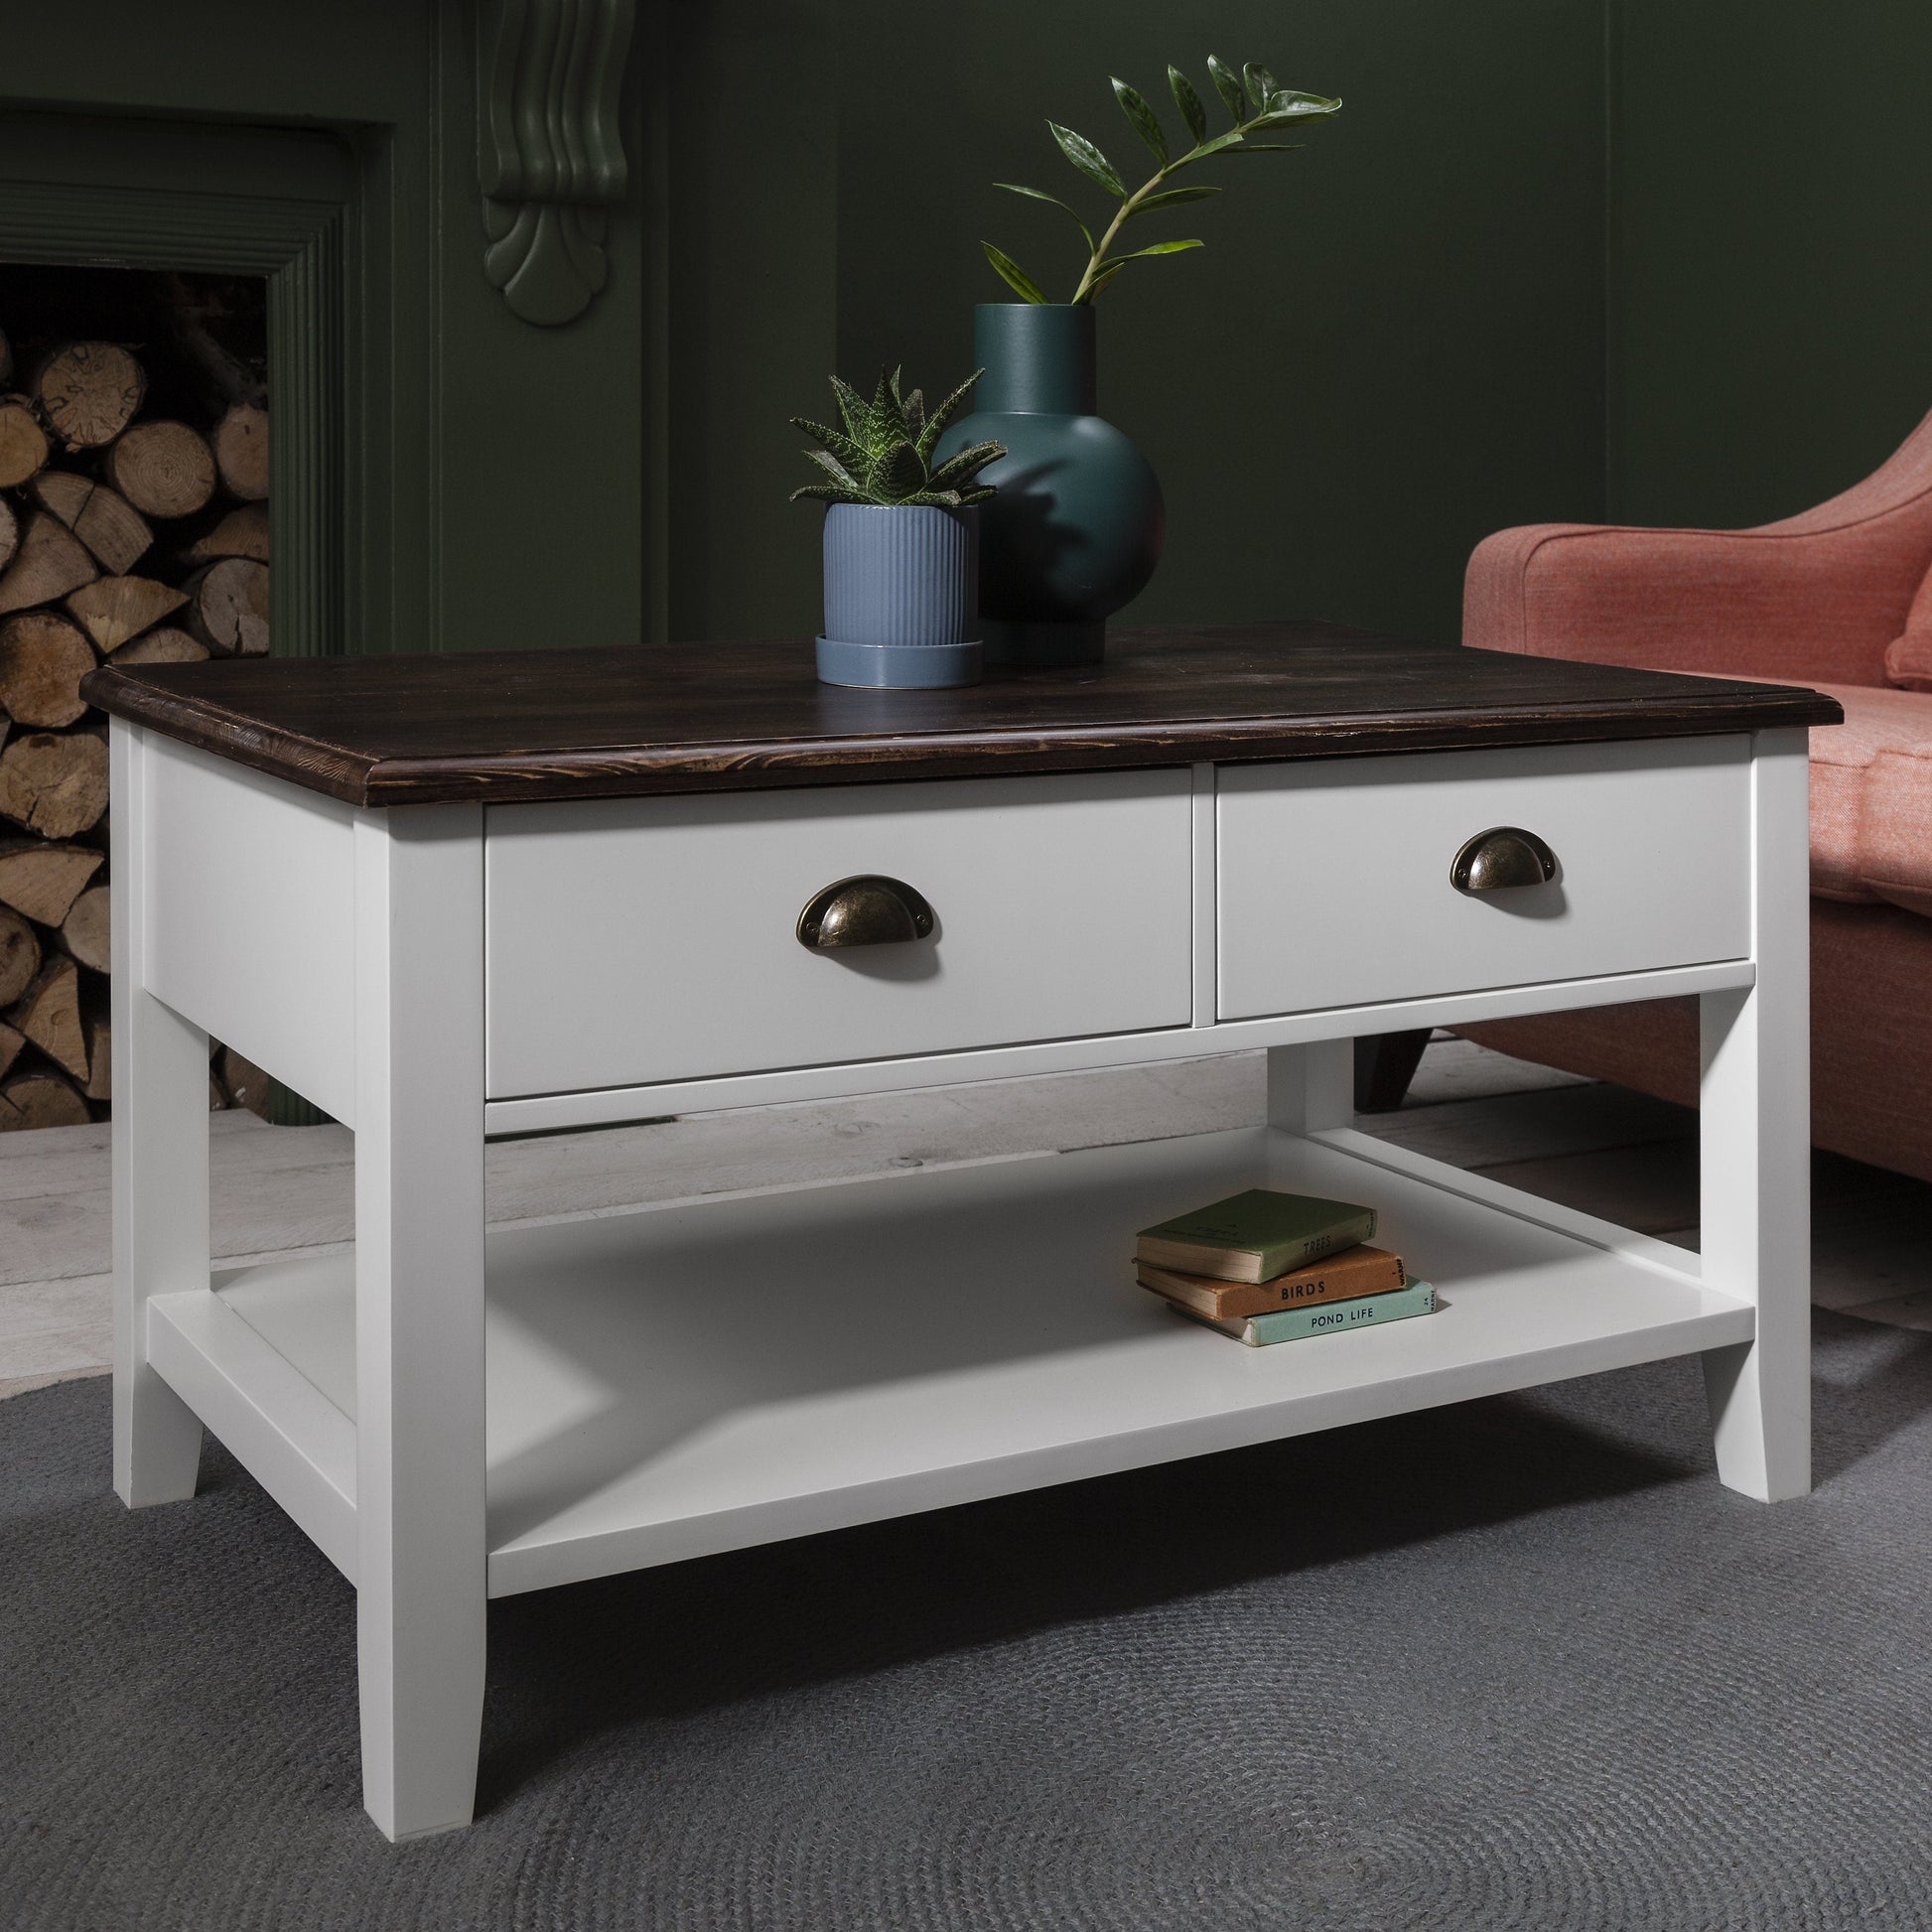 White Wooden Coffee Table with 4 Storage Drawers - Laura James